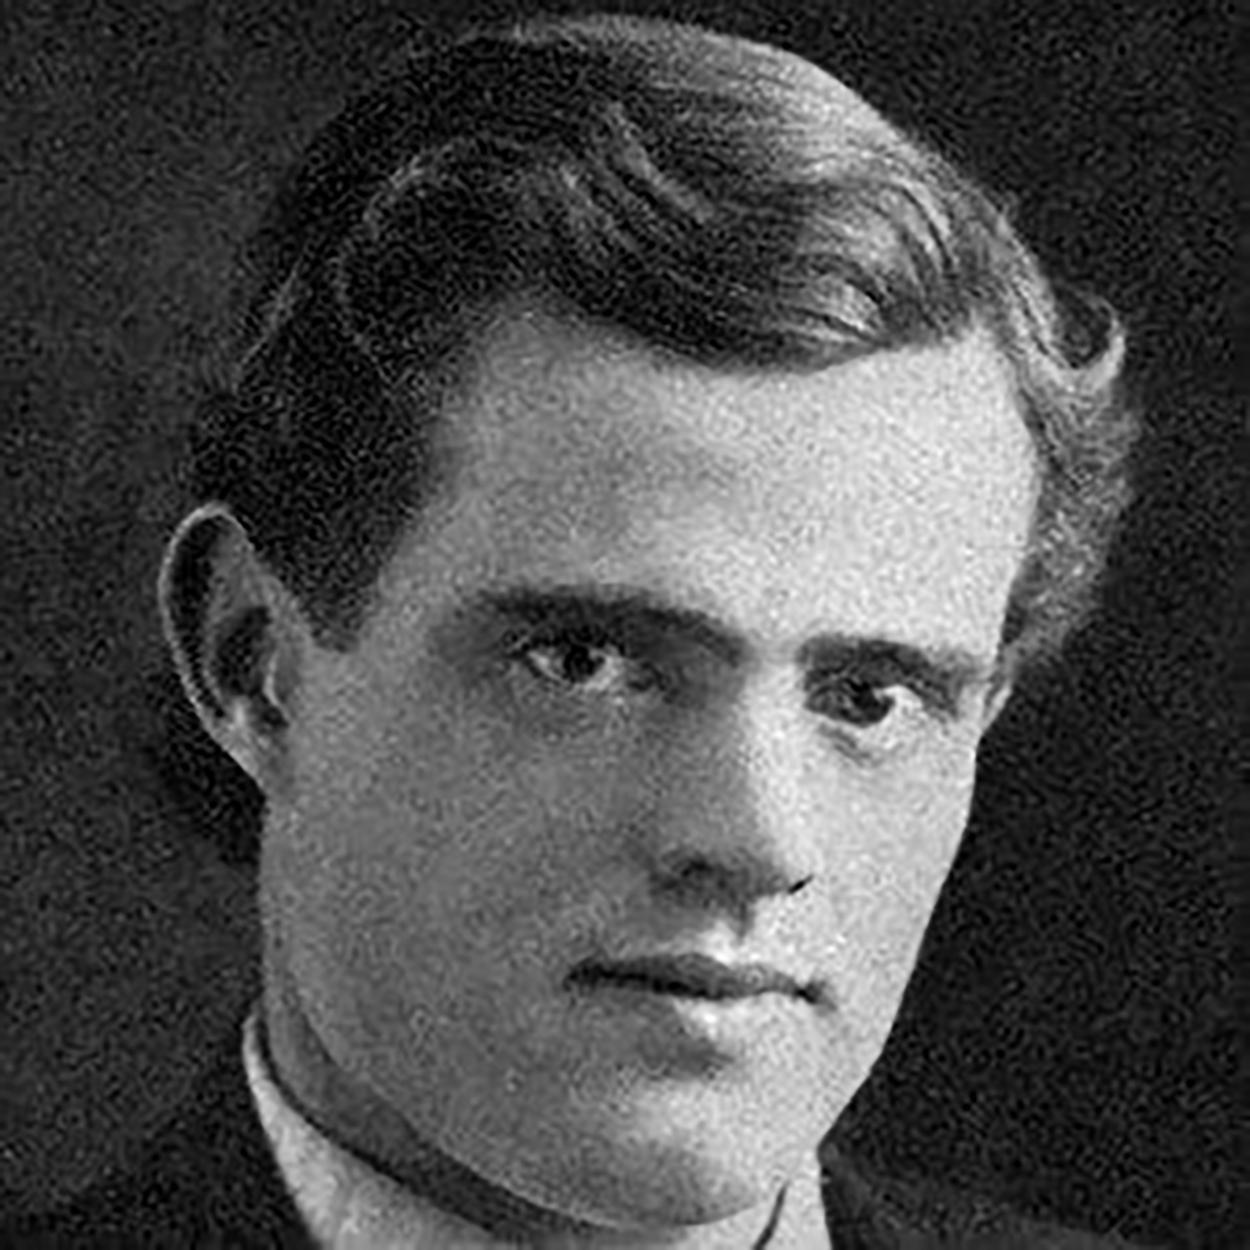 Early 20th Century Likeness of Jack London
Wonderful portrait of a gentleman with a striking likeness to Jack London by Robert Alexander Graham (American, 1873 - 1946). Attribution of artist and sitter on stretcher bar. Condition: Previously